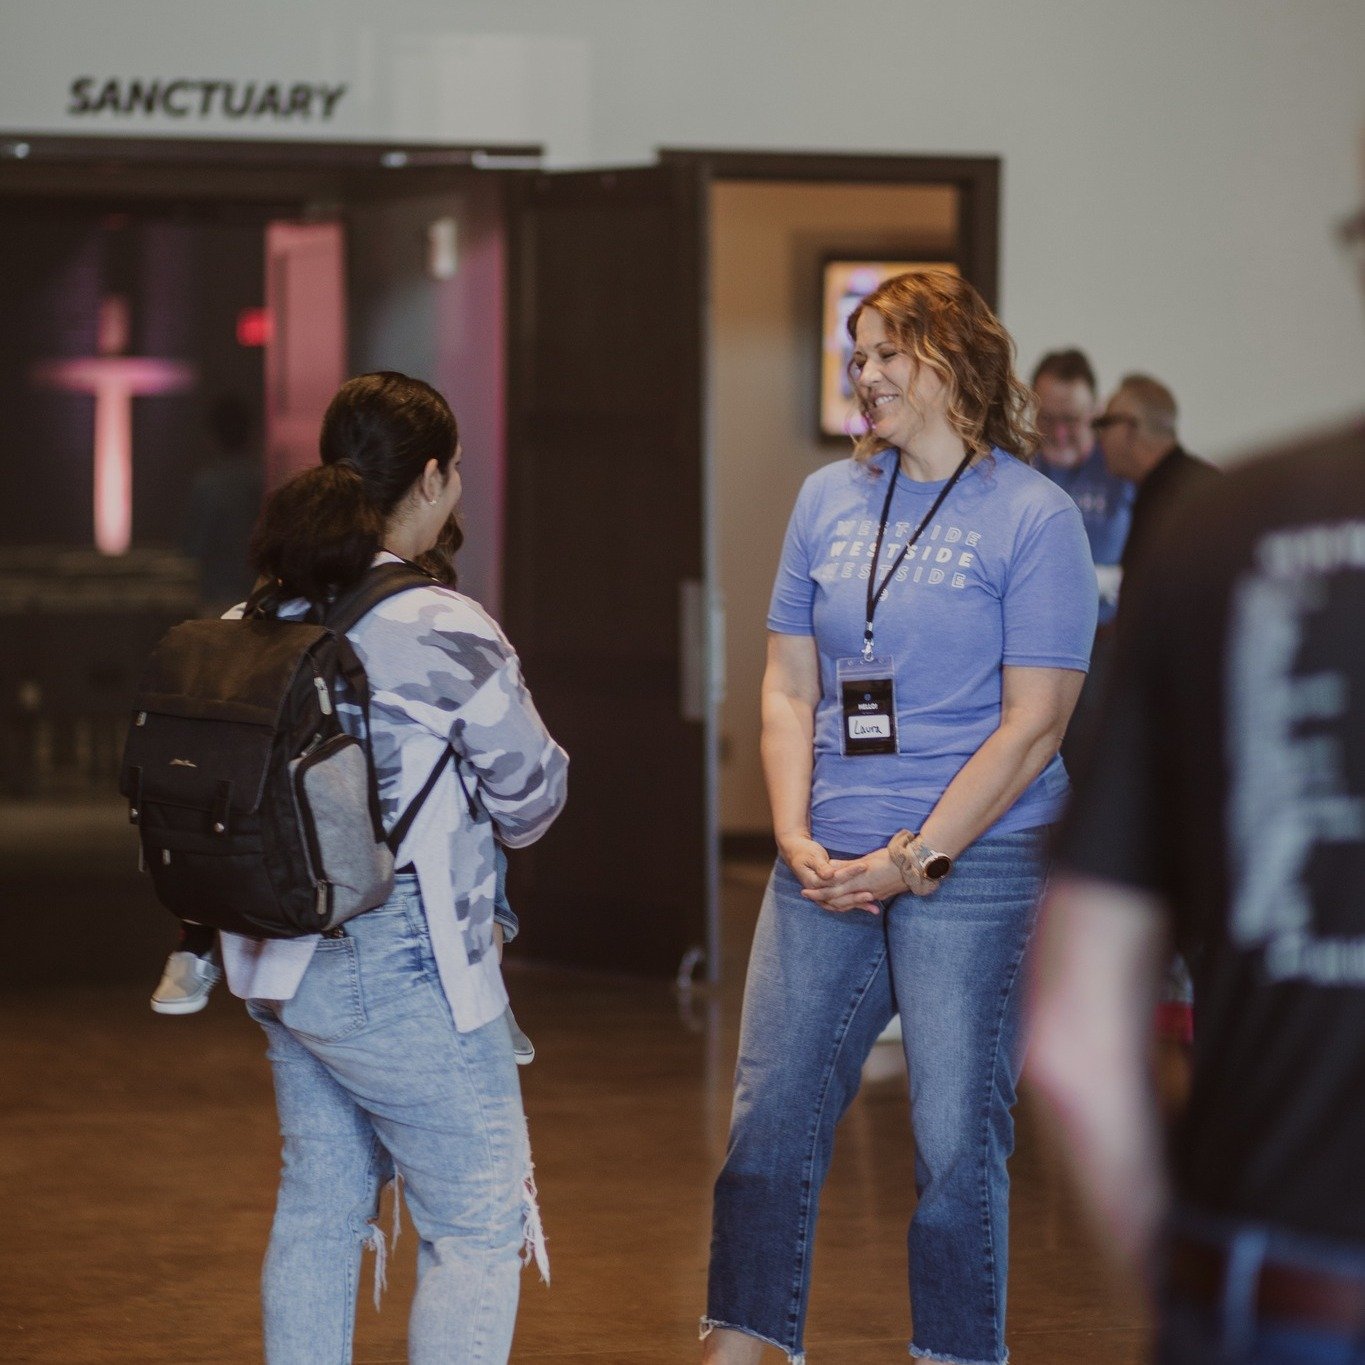 Only one more sleep until the best day of the week 🎉

P.S. Tomorrow is the Grand Opening of Embrace Westside 🤩 Invite a friend &amp; join us at 9 or 10:30 am!